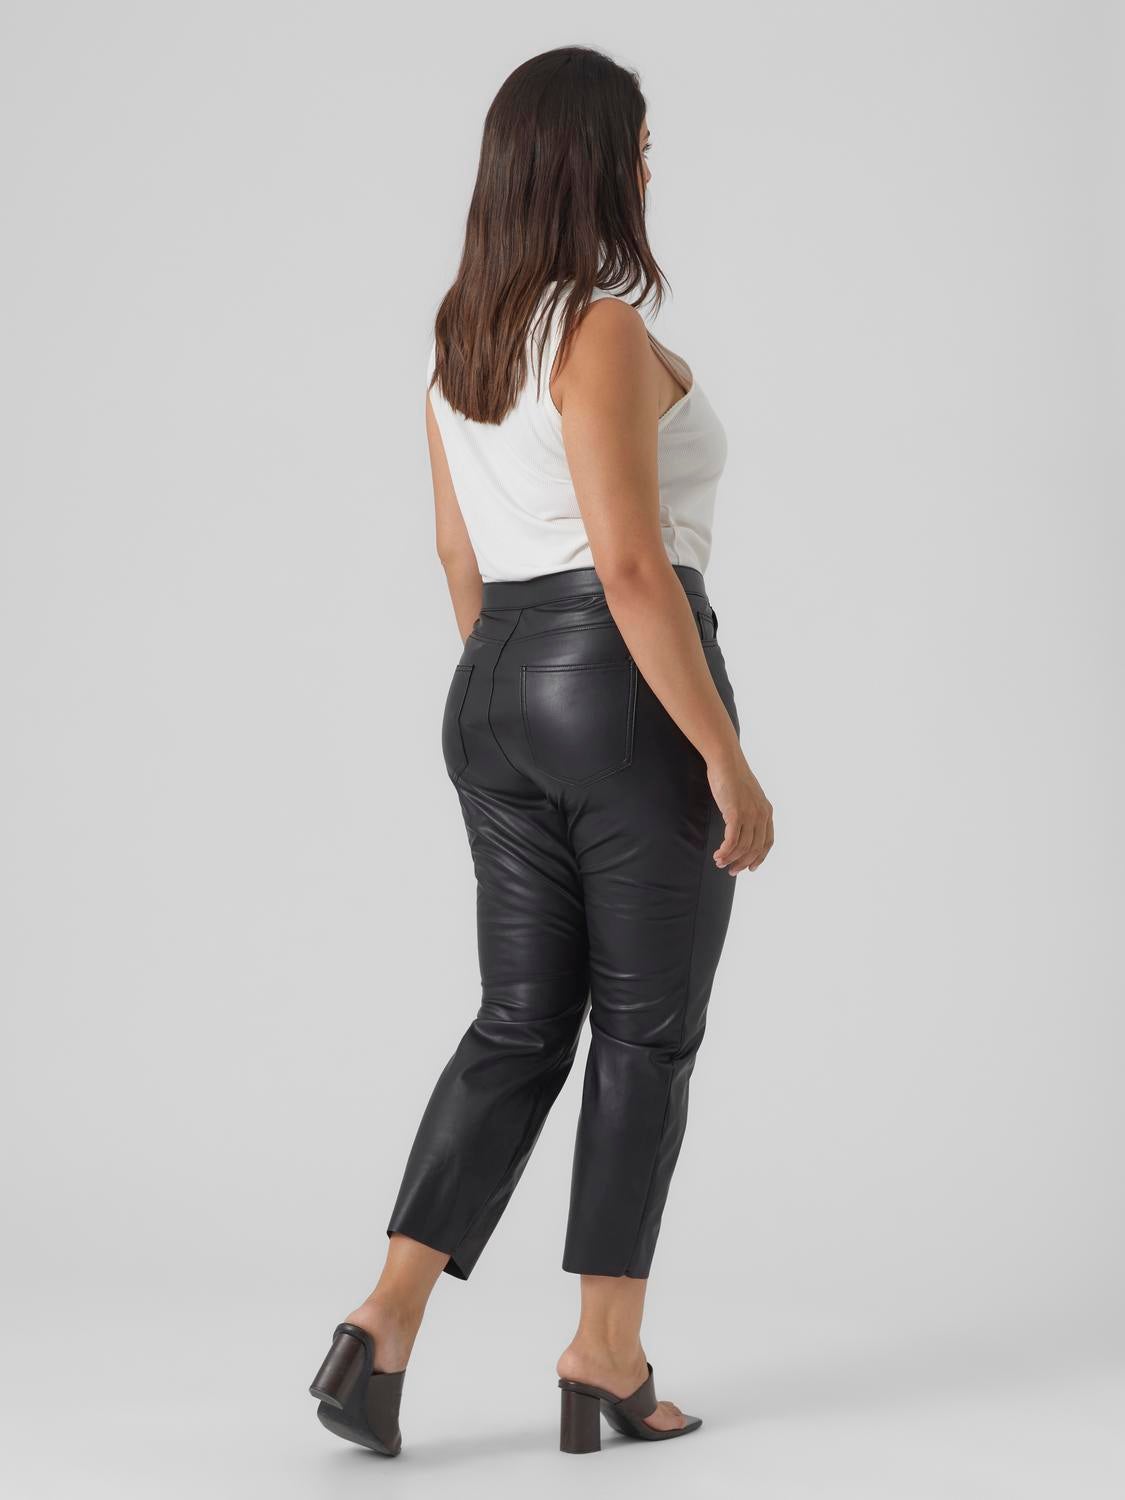 Vero Moda leather look high waisted straight leg trousers in black  ASOS